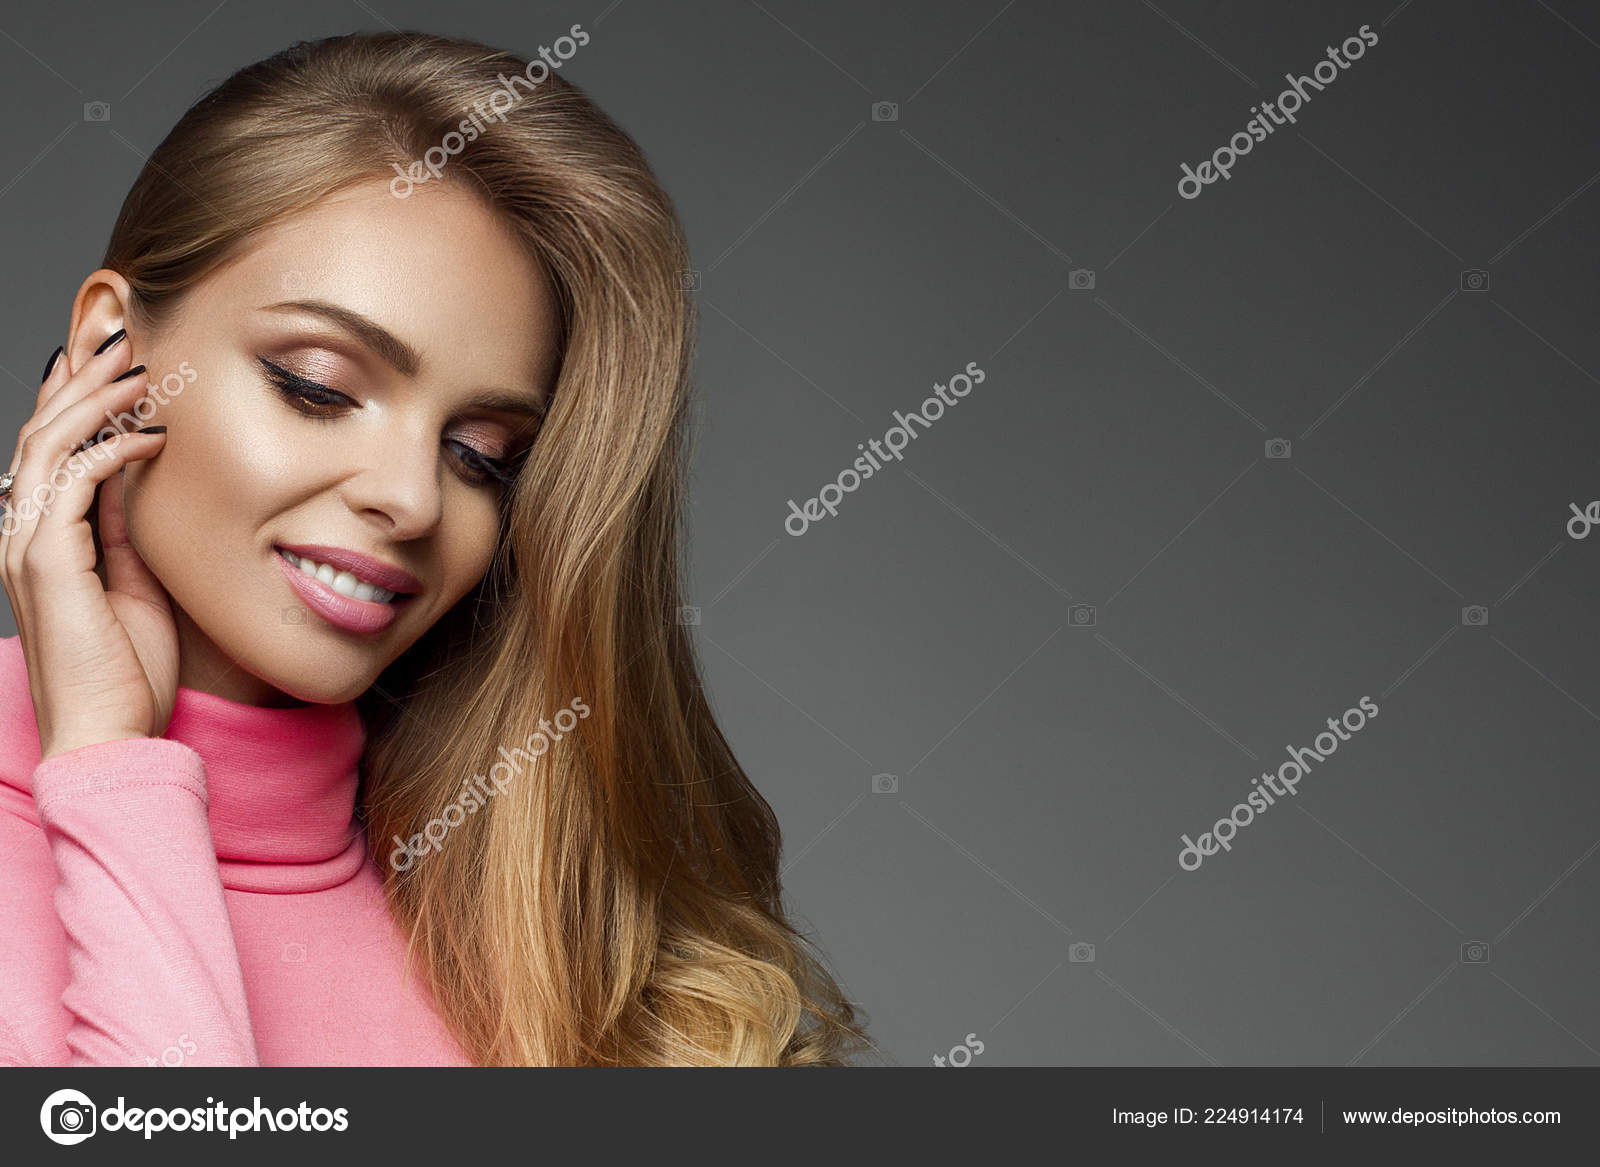 Gorgeous Blonde Long Haired Woman With Perfect Skin And Make Up